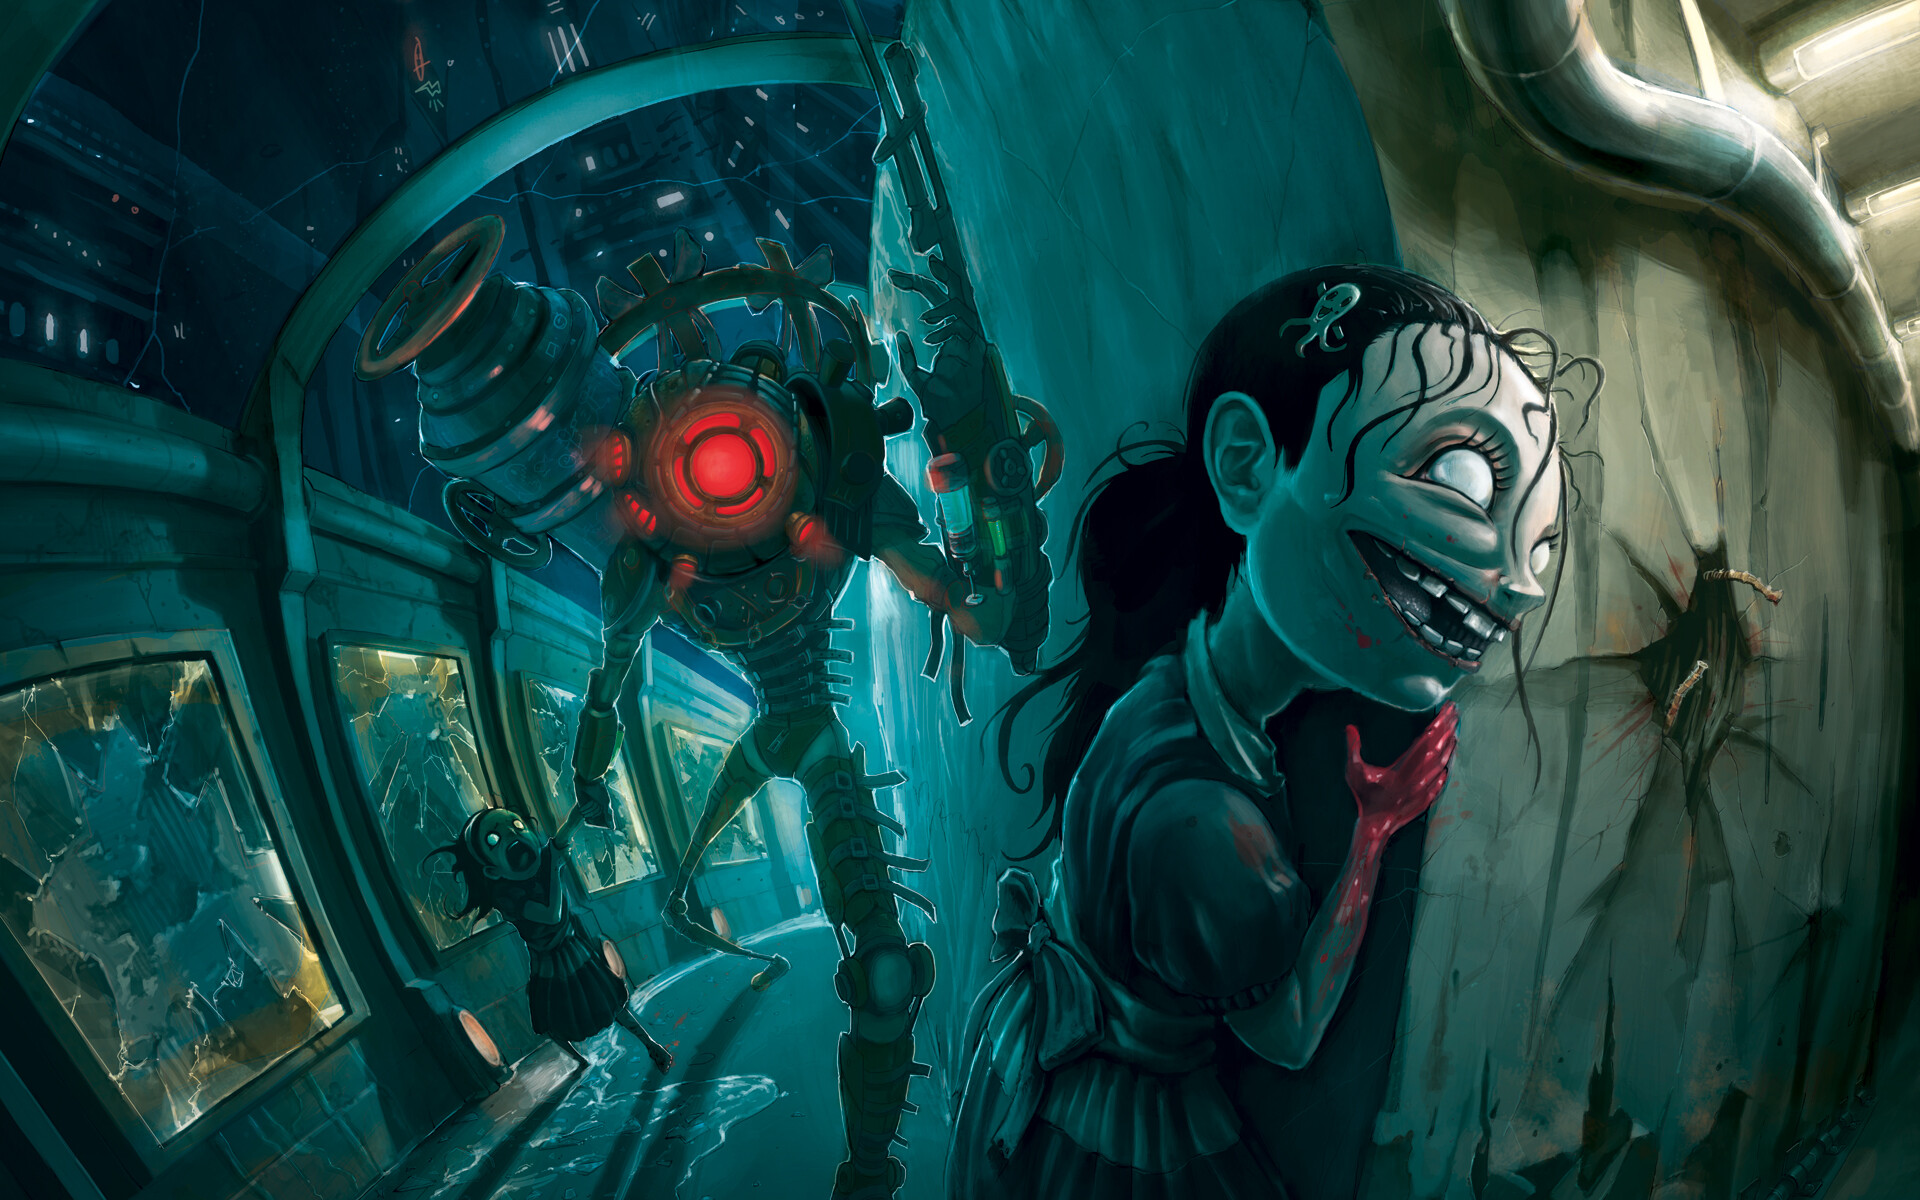 BioShock: A retrofuturistic video game series created by Ken Levine, published by 2K Games. 1920x1200 HD Background.